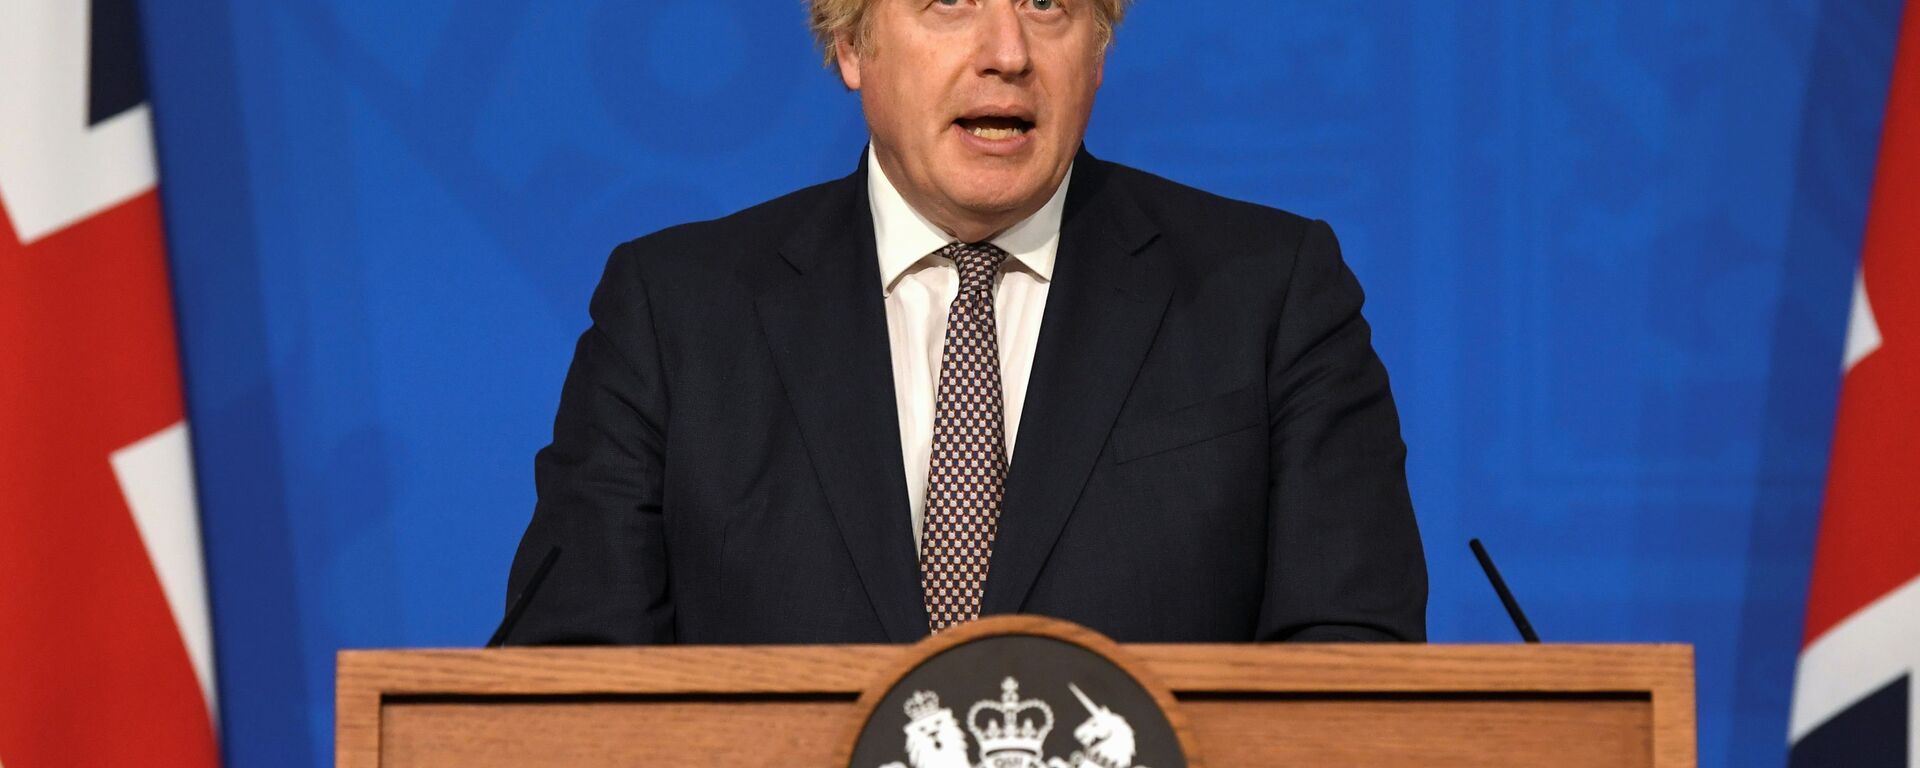 British Prime Minister Boris Johnson holds a news conference for England's COVID-19 lockdown easing announcement in London - Sputnik International, 1920